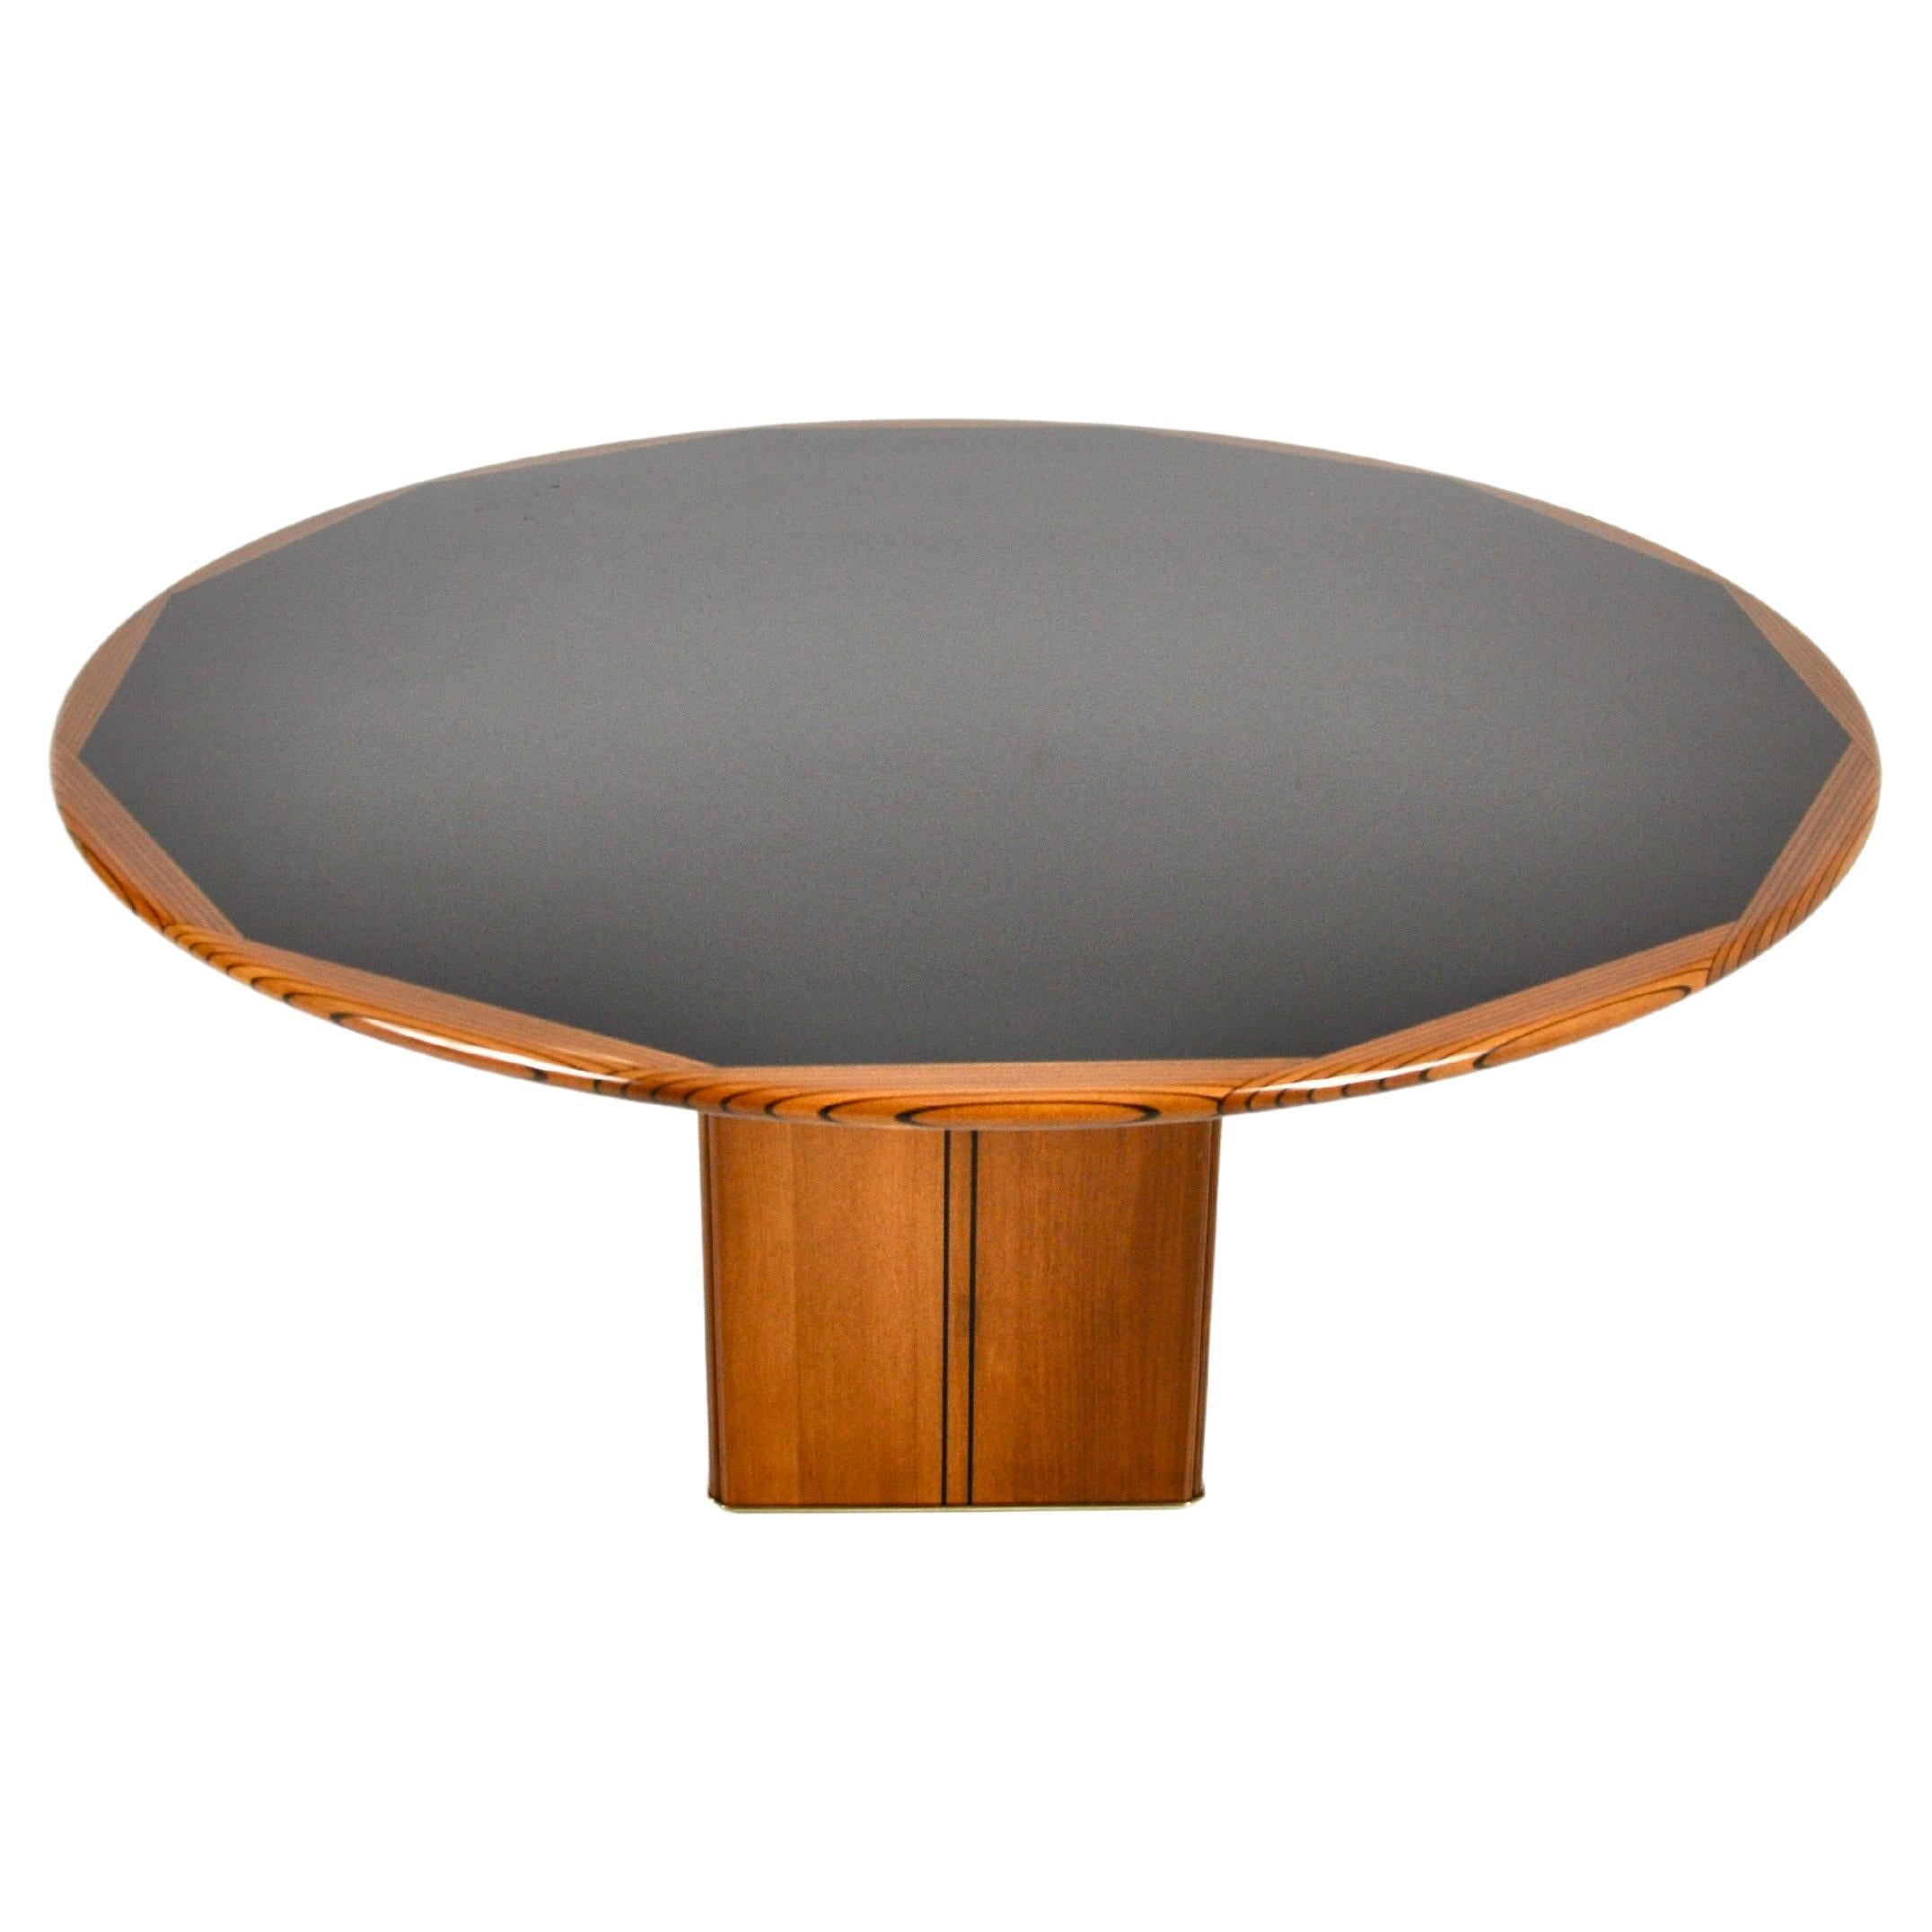 Round Africa Table by Afra & Tobia Scarpa for Maxalto, 1975